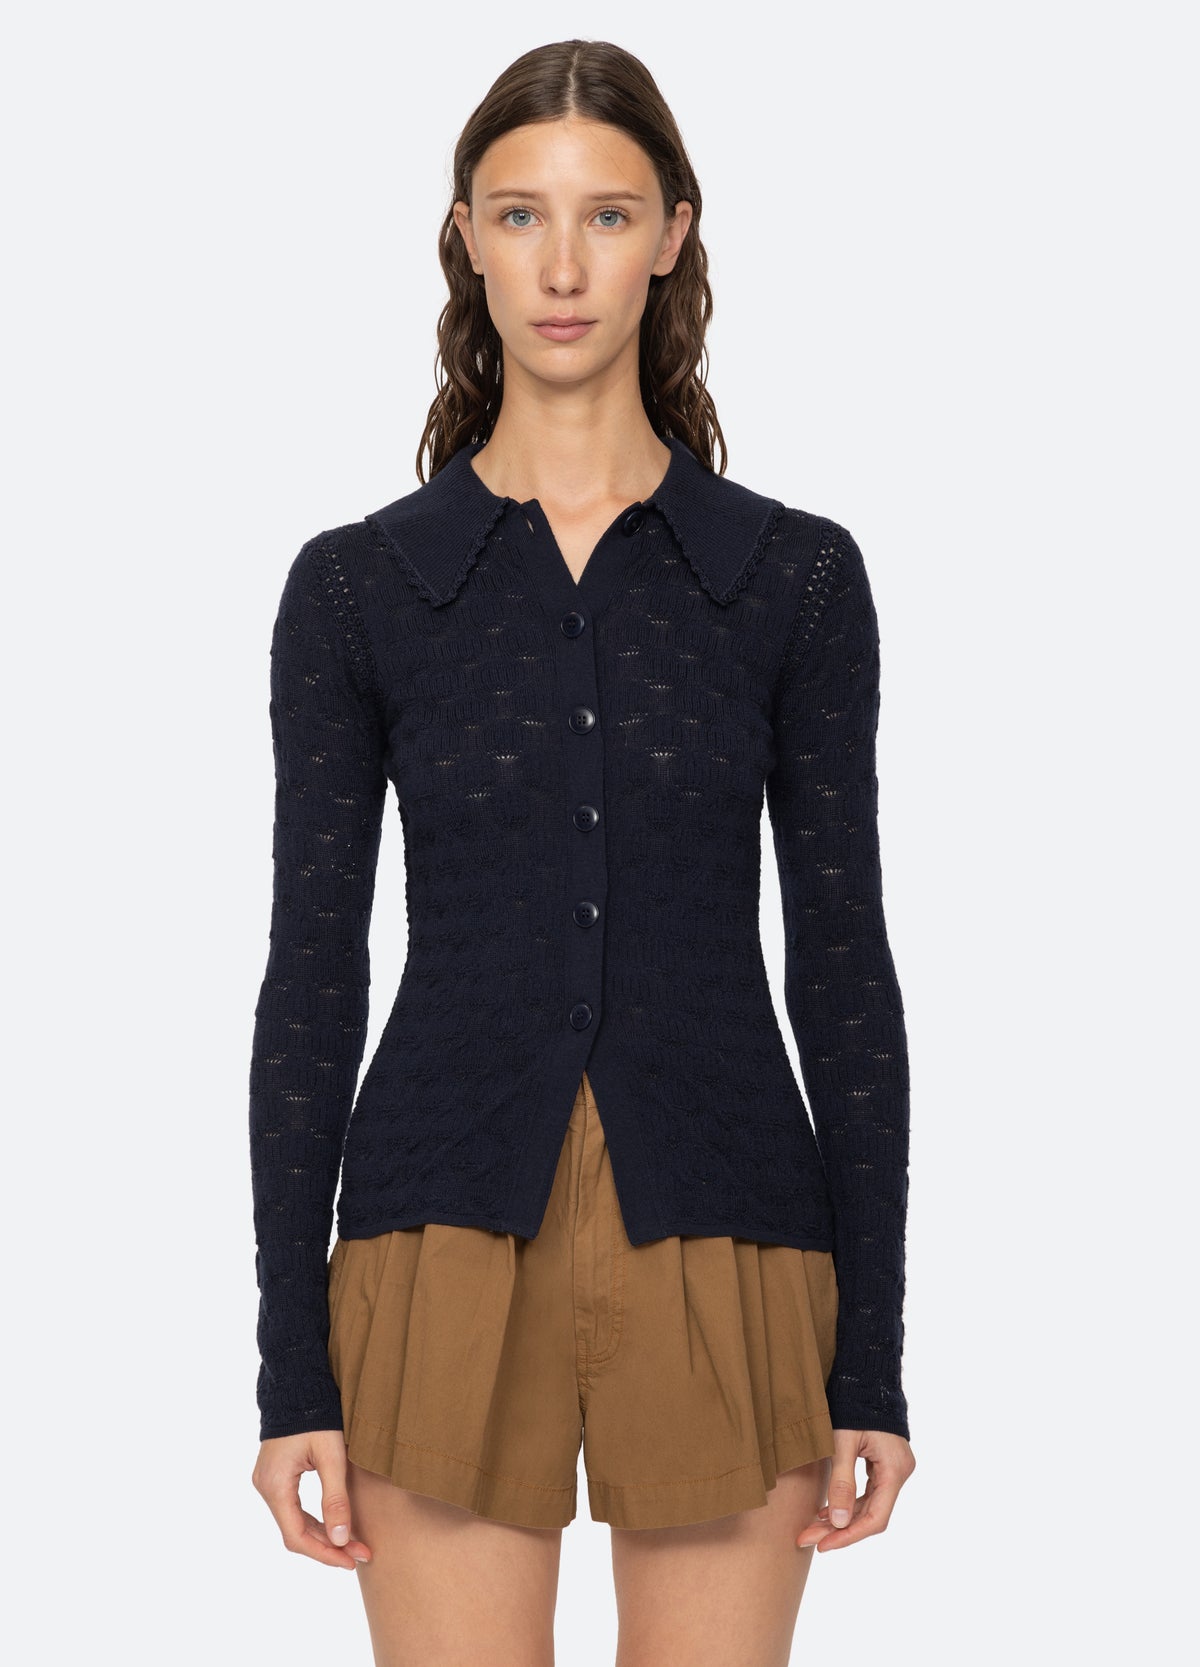 navy-mila cardigan-front view